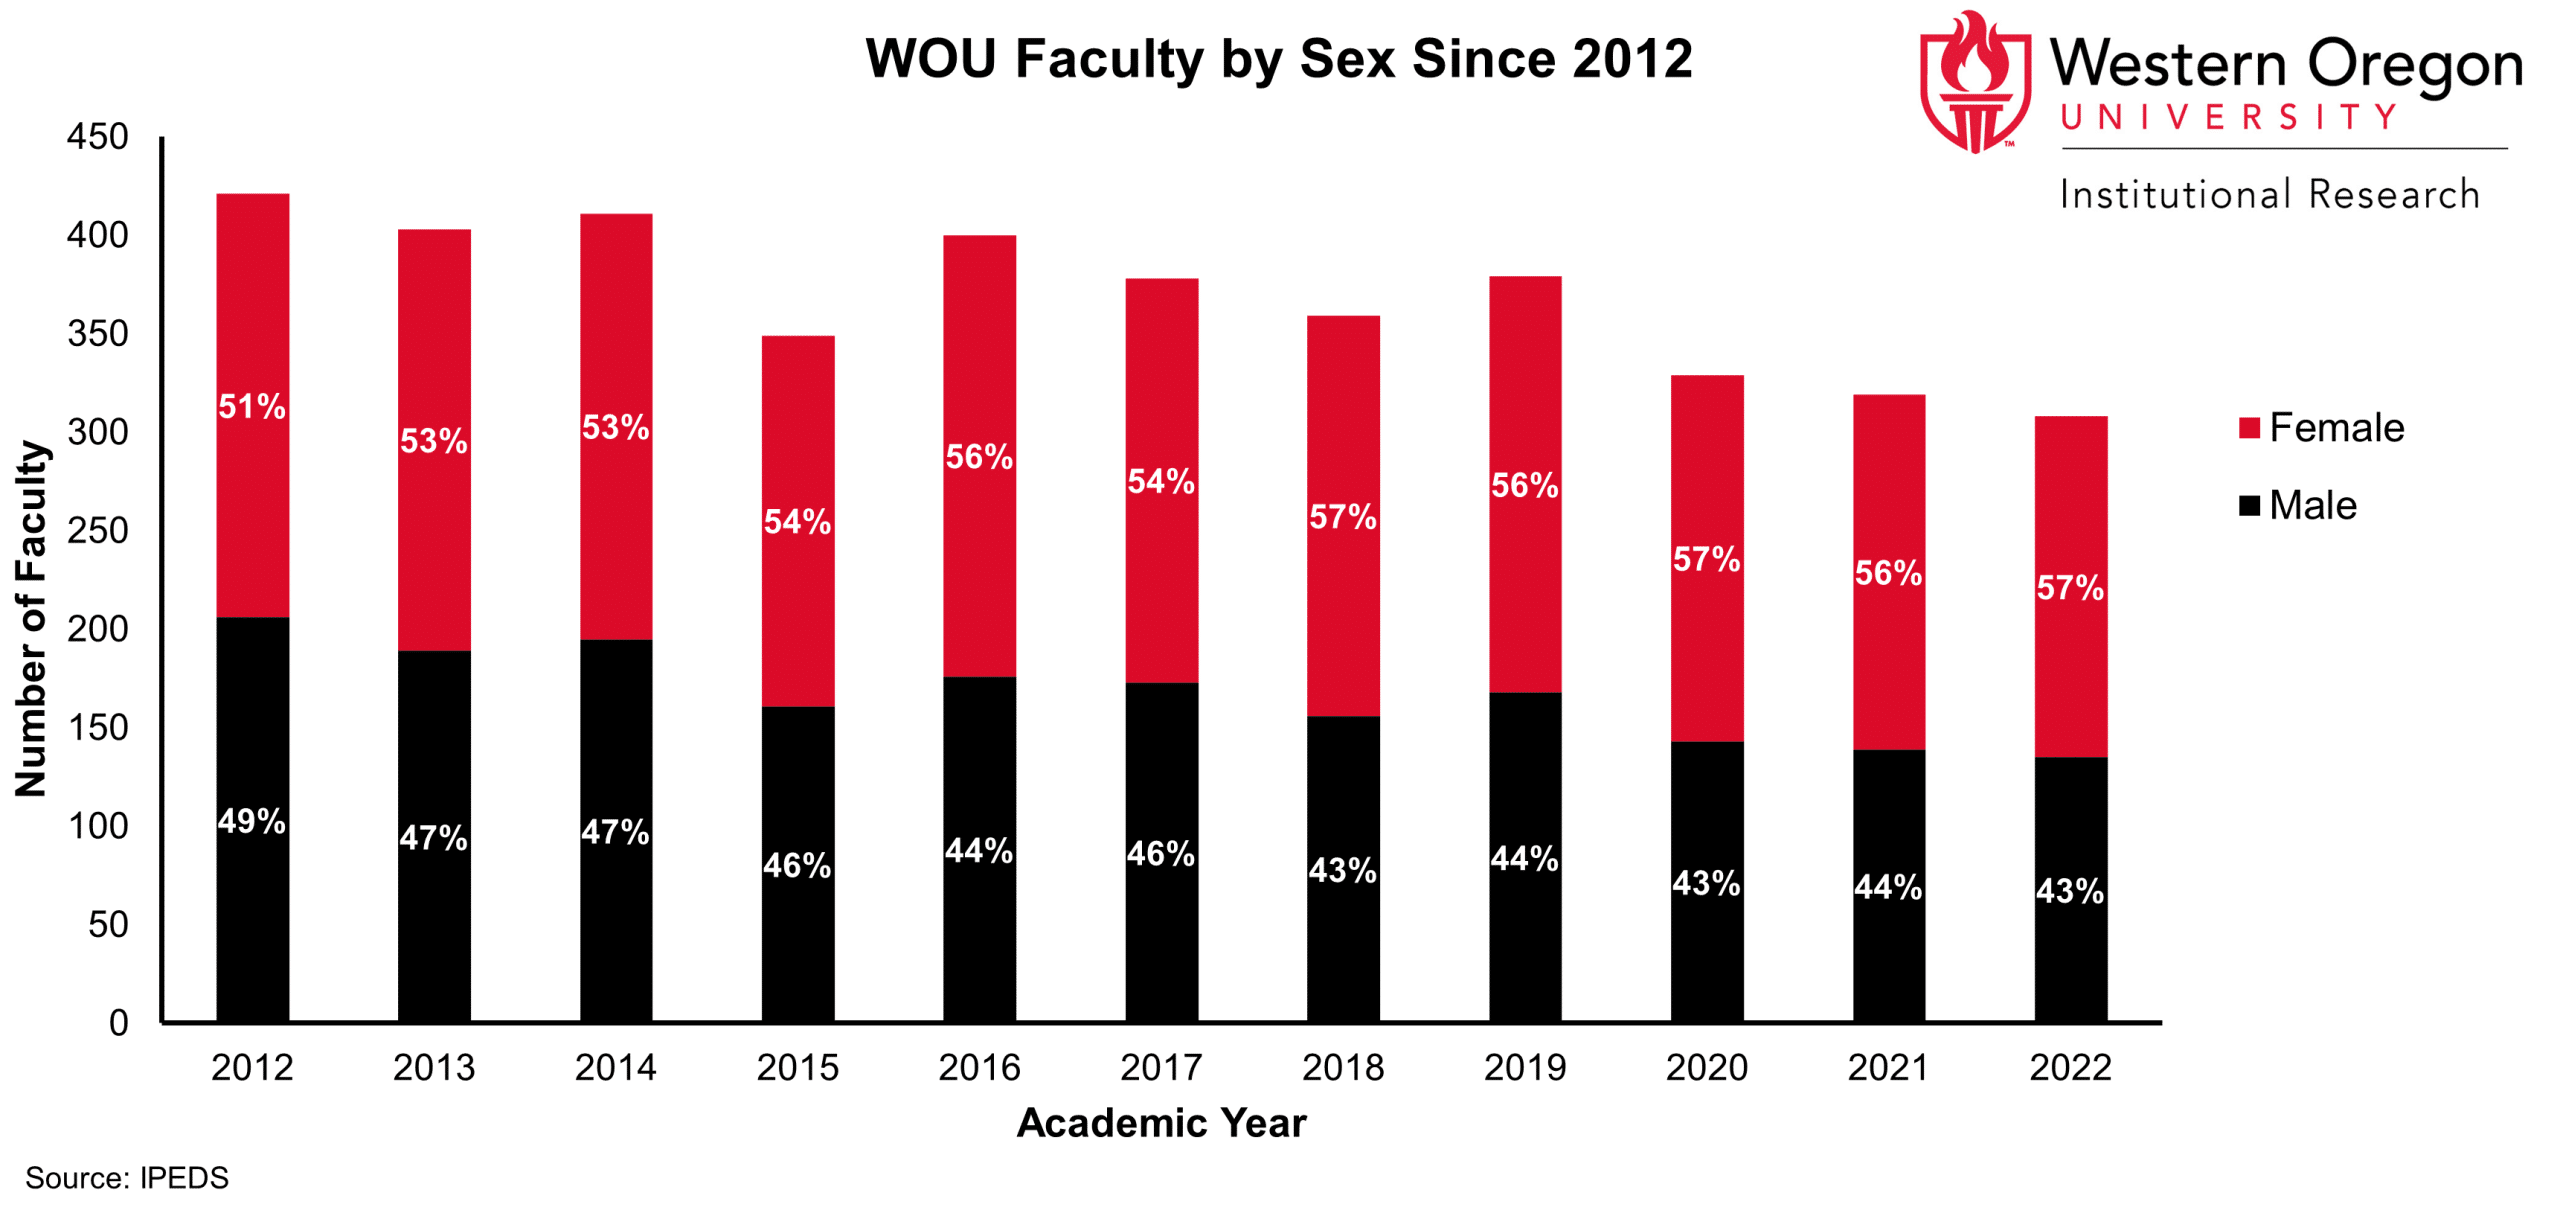 The total number of faculty has been slowly decreasing since 2012, and the percentage of female faculty has been slowly increasing.